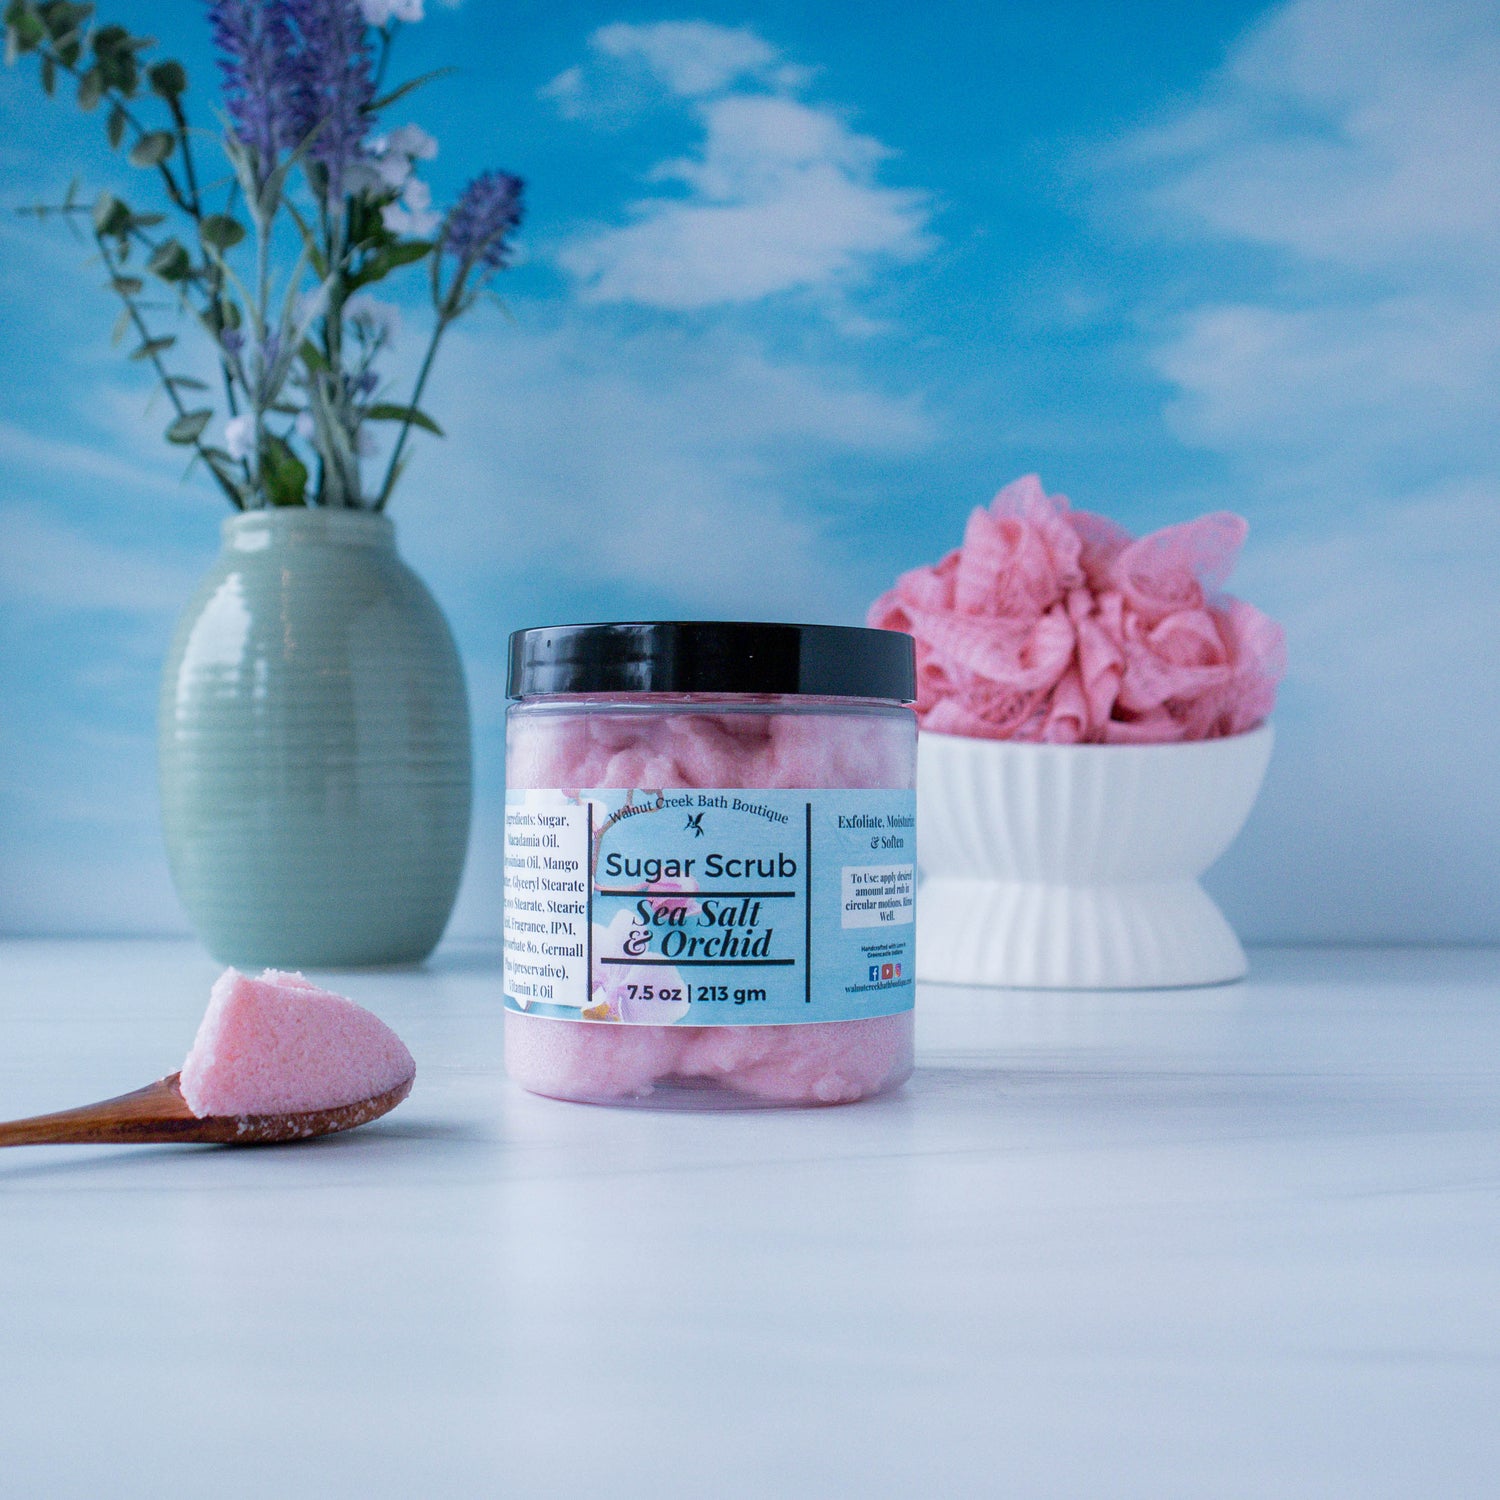 Sea Salt &amp; Orchid scrub is sitting center with a wooden spoon holding some product to show texture.  to the left is a green vase with some greenery and to the right back is a white dish holding a pink loofa. this is all sitting on a white board and there is a sky backdrop.